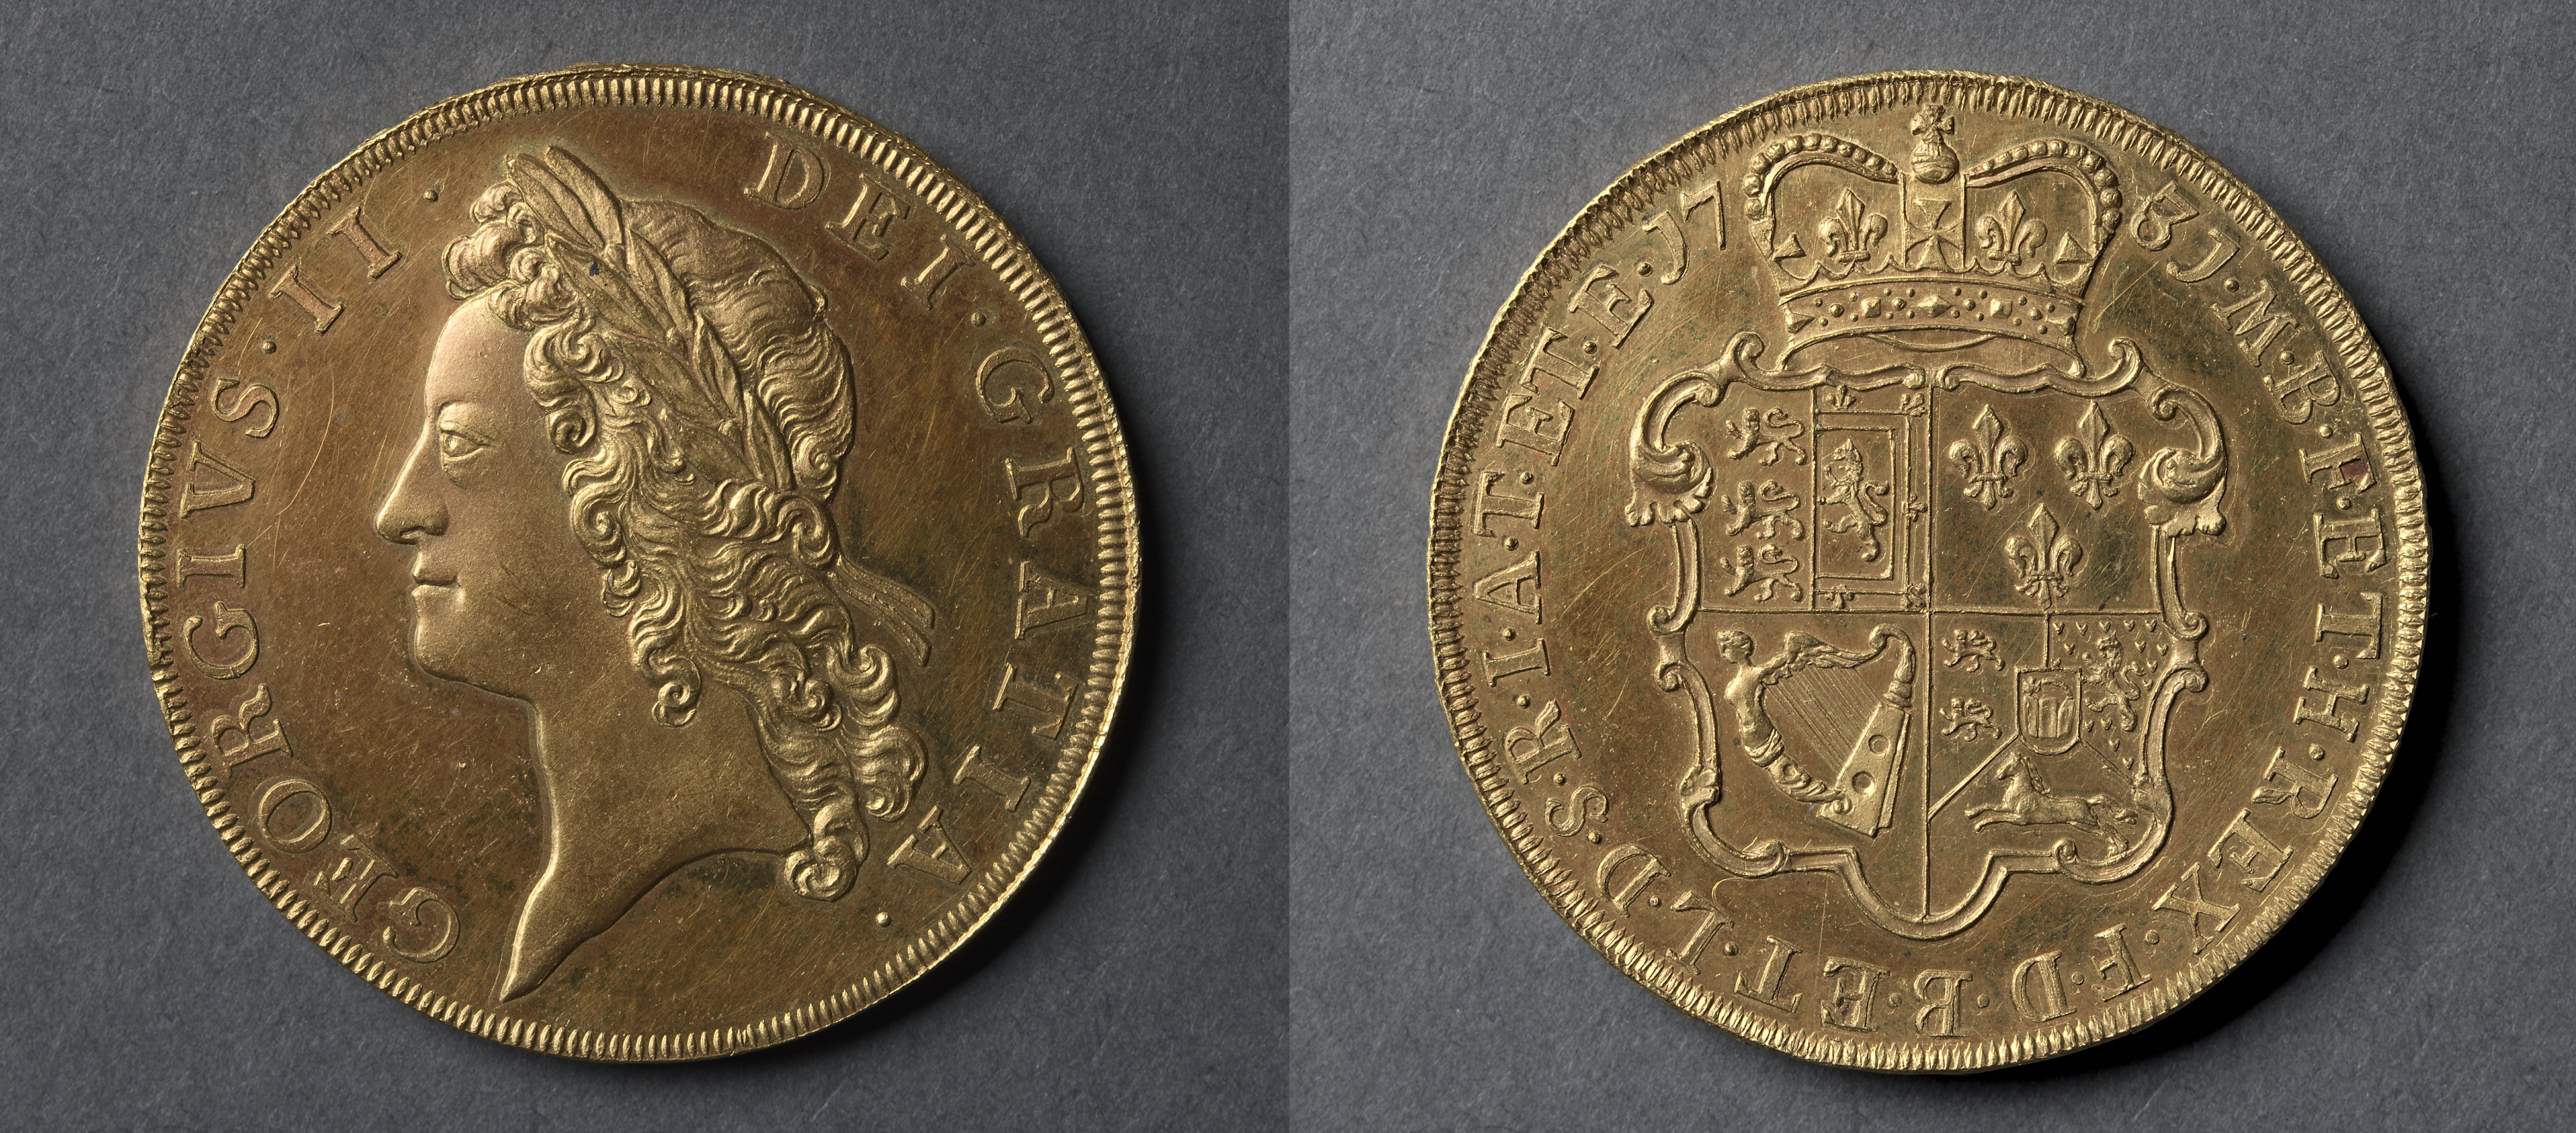 Five Guineas: George II (obverse); Shield of Arms (reverse)